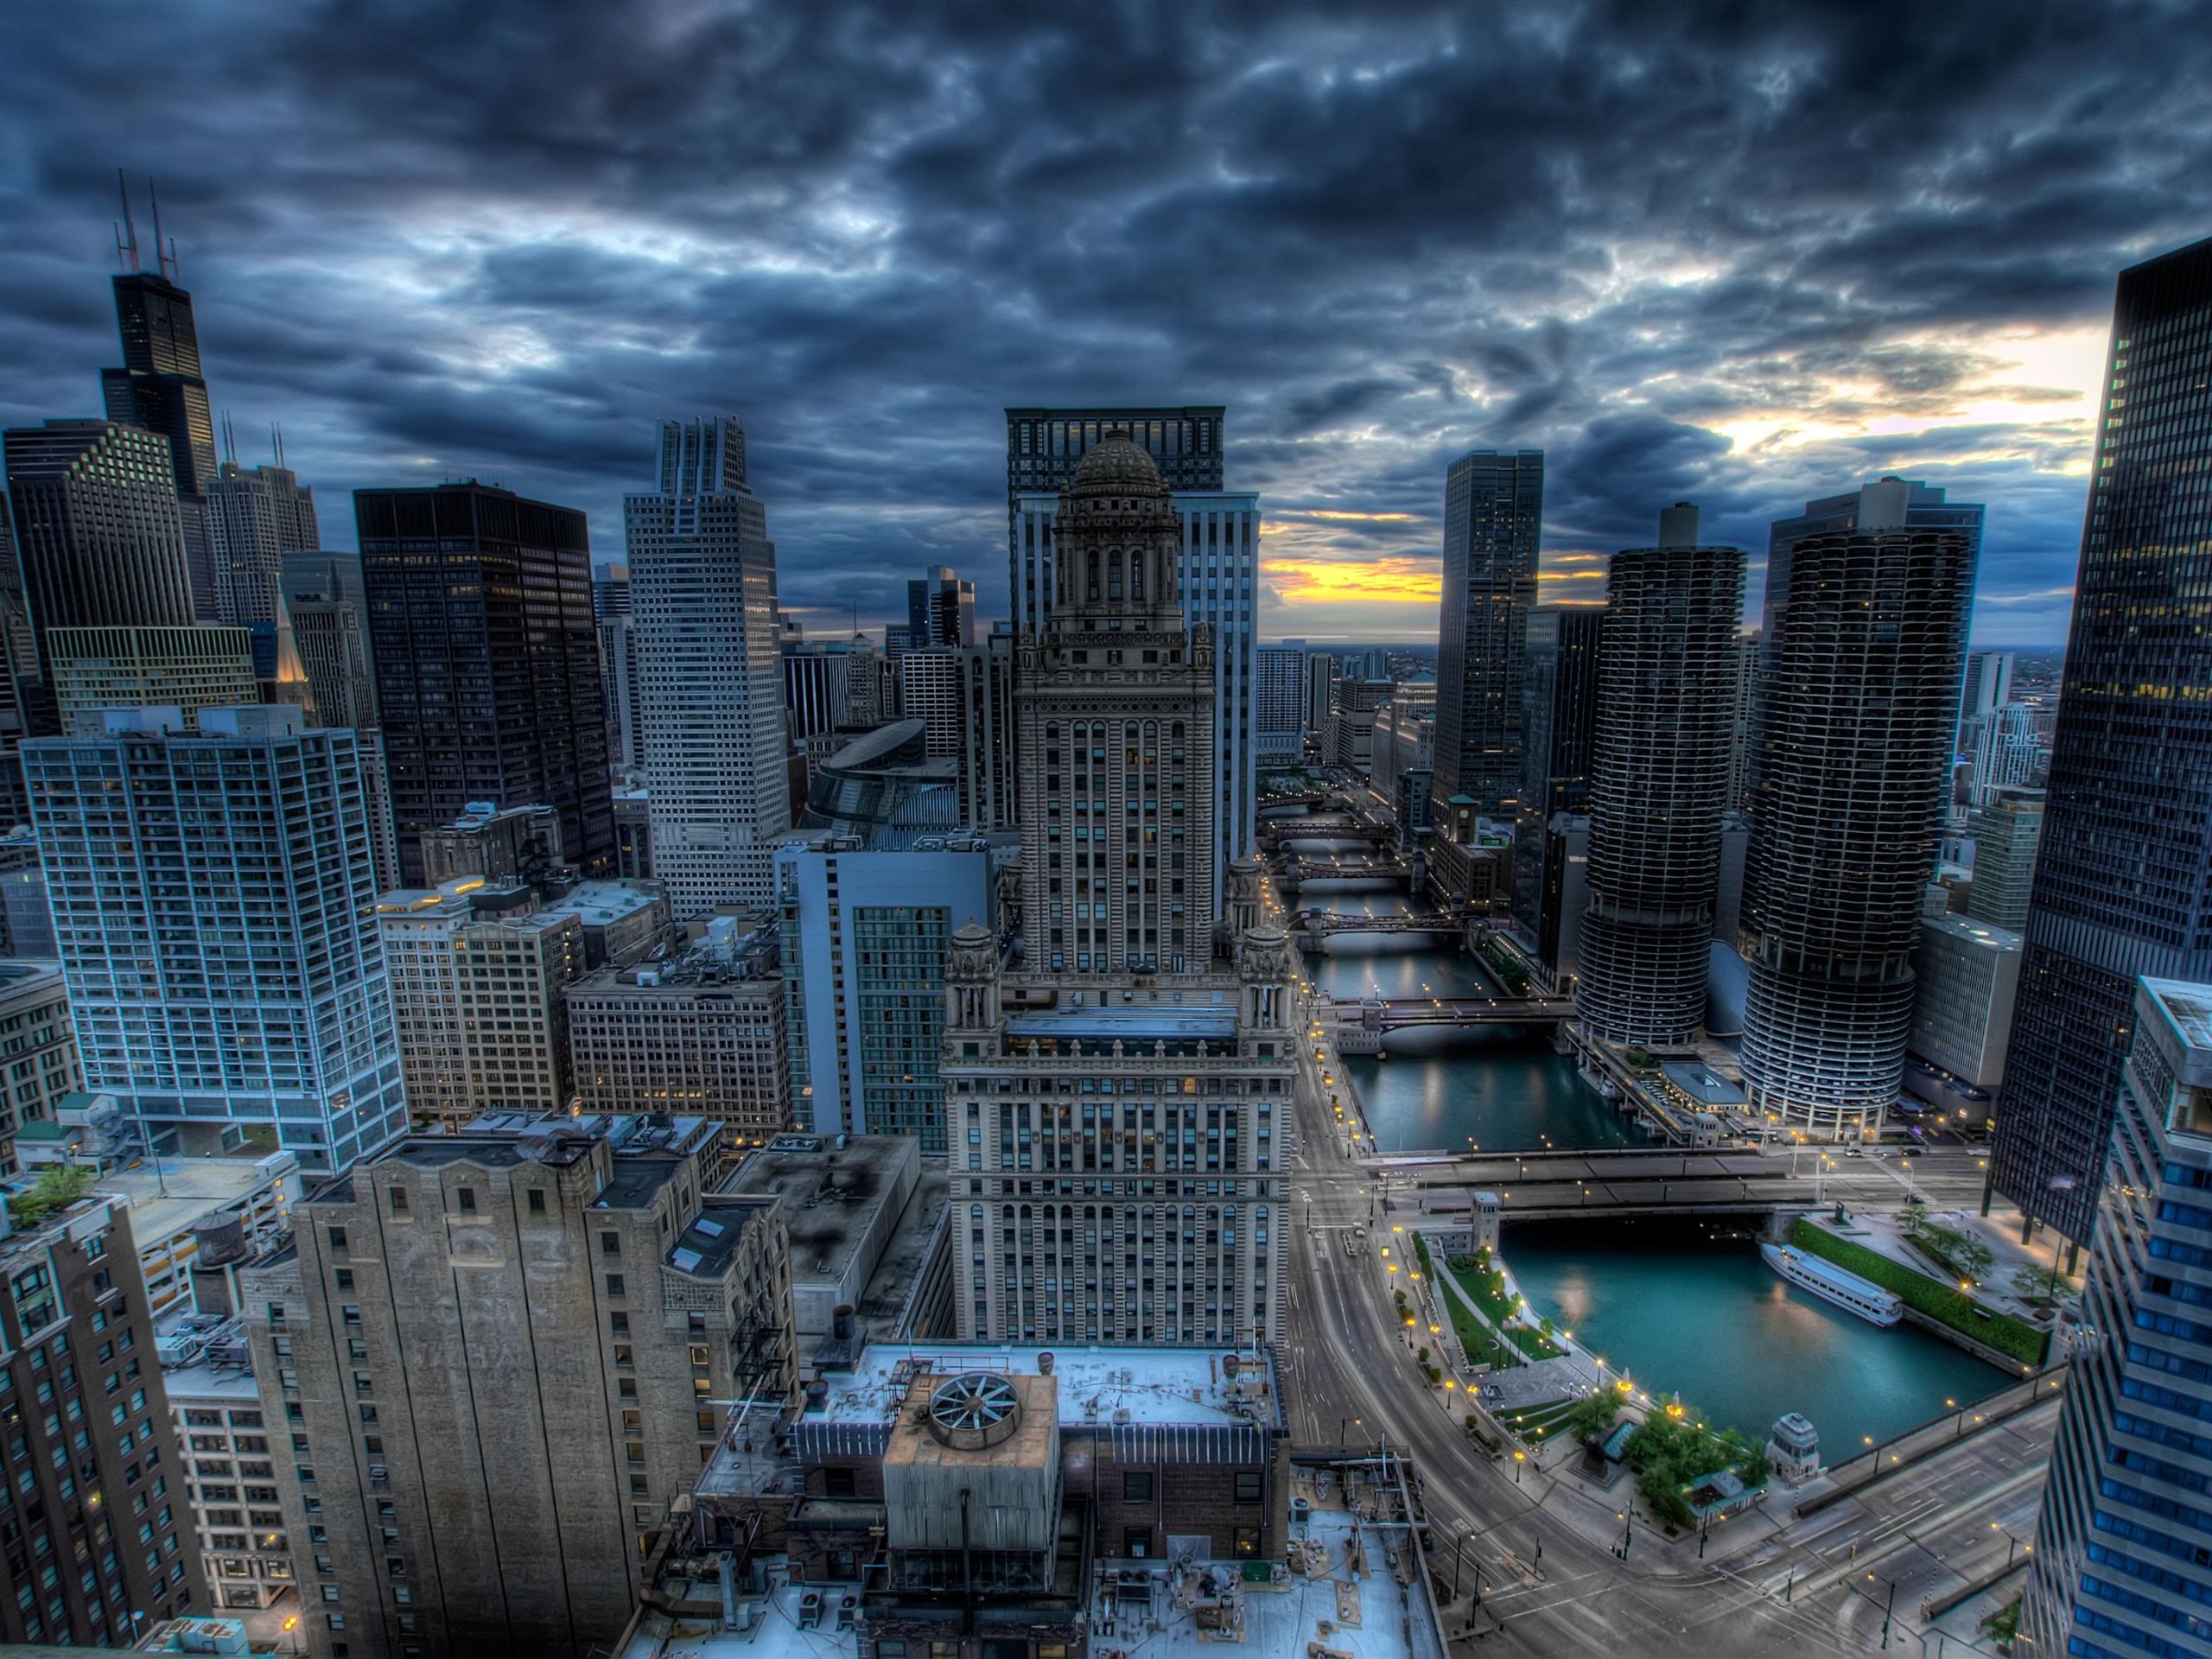 The skyline of Chicago, Illinois, USA, with a cloudy sky - Chicago